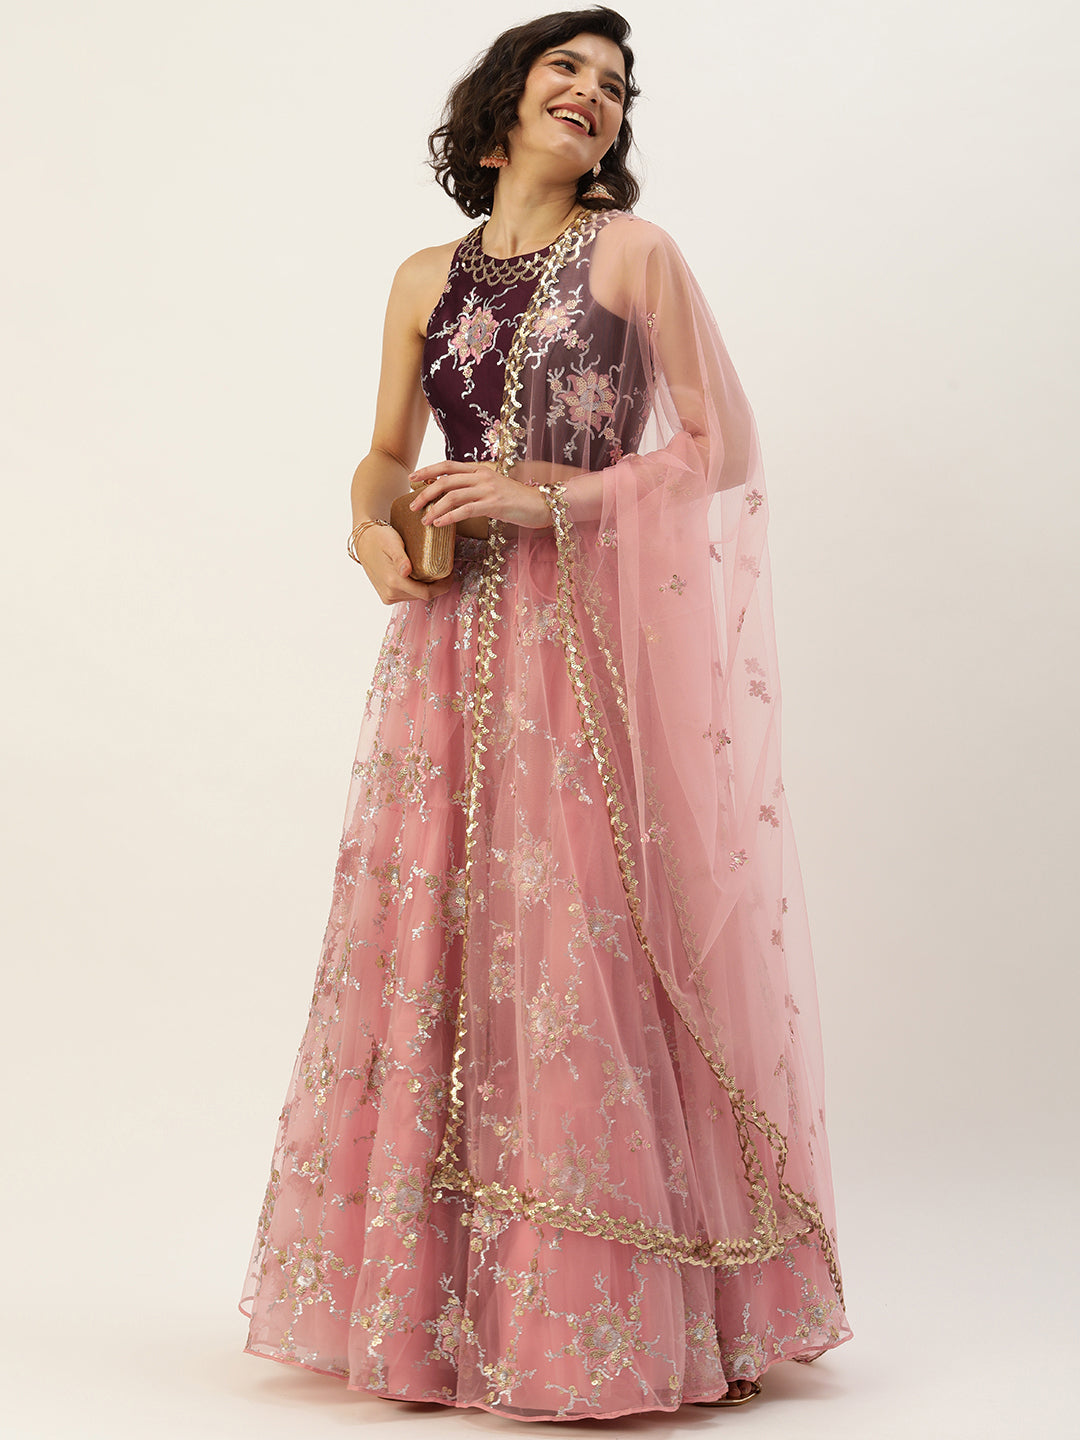 Women's Pink Net Sequince Embroideried Lehenga  Blouse With Dupatta - Royal Dwells